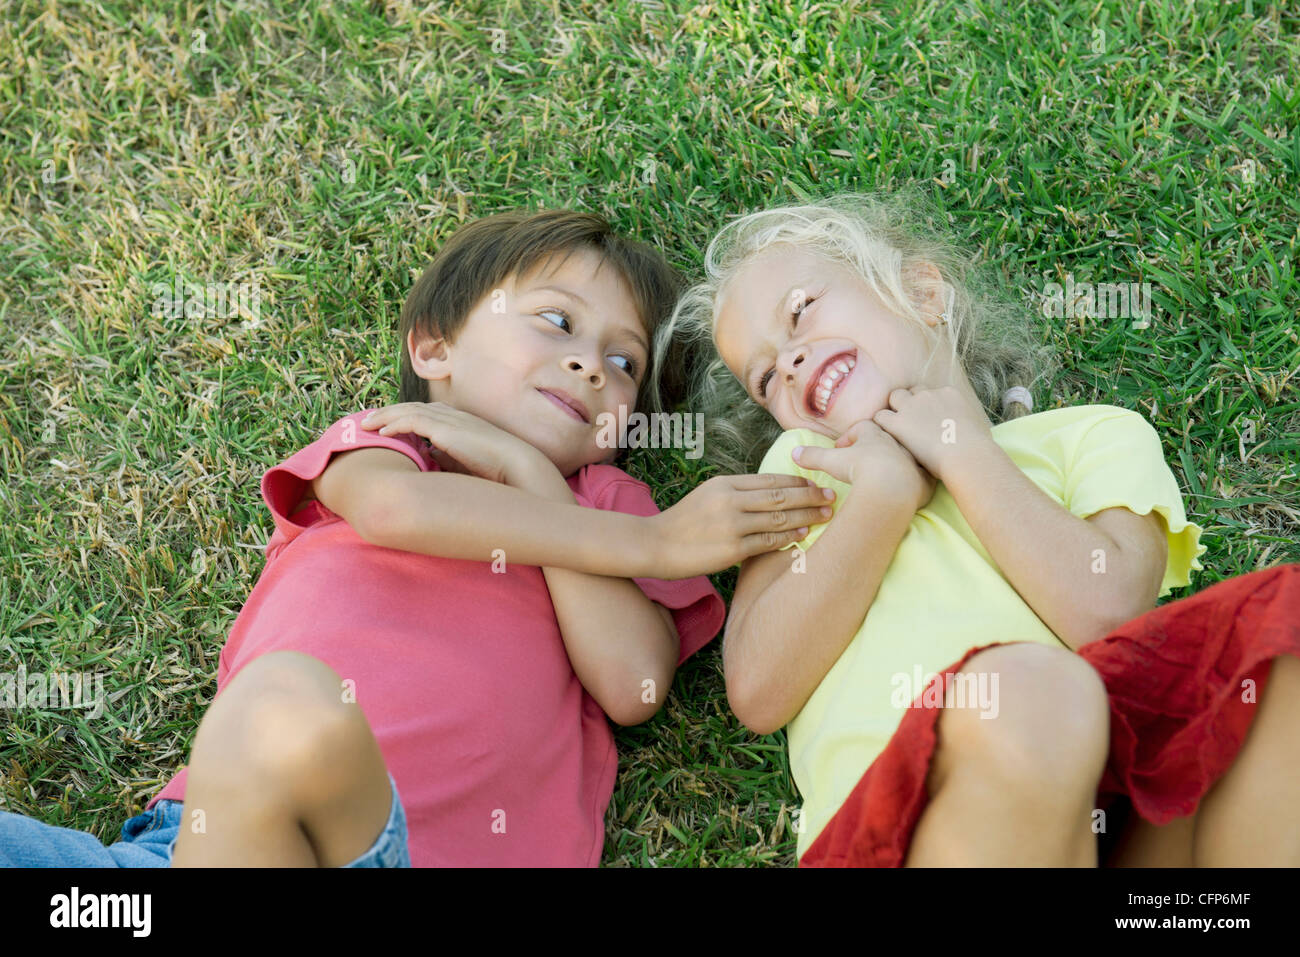 Jeunes amis lying together on grass Banque D'Images